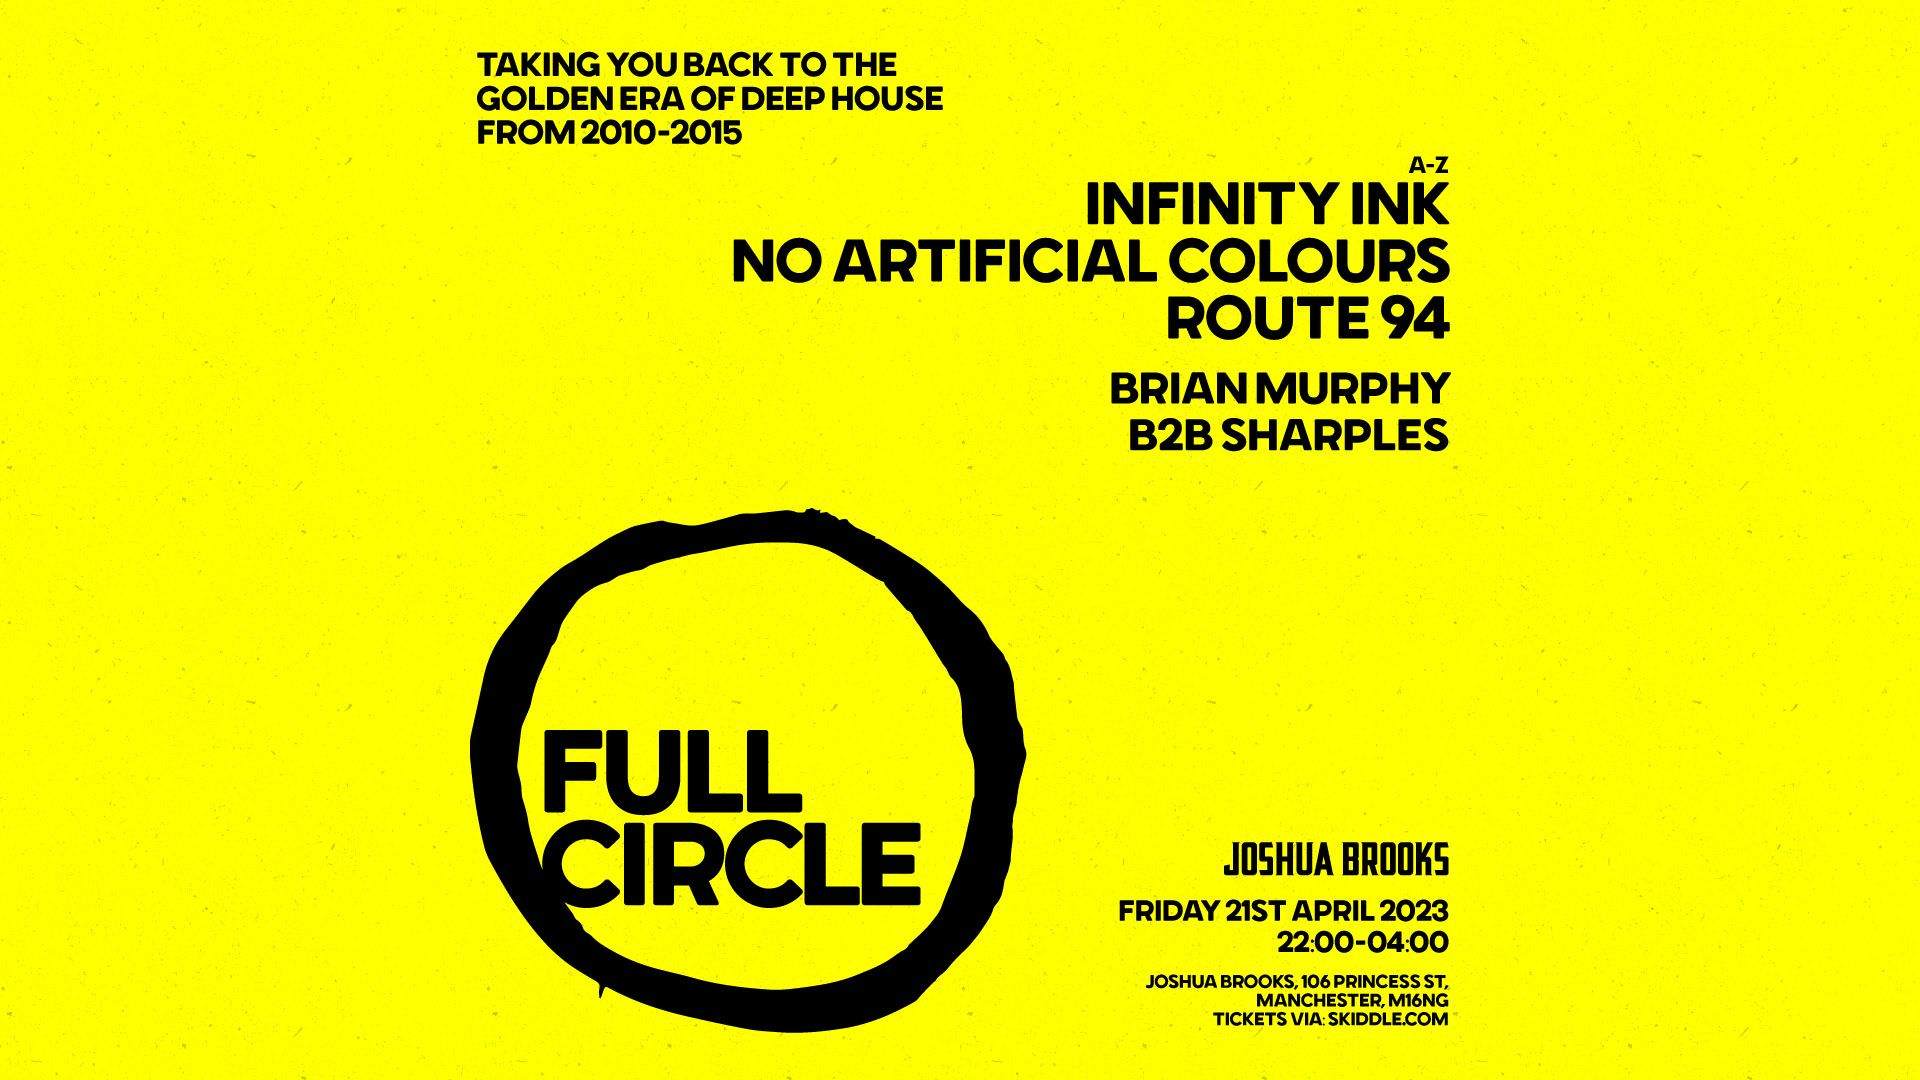 Full Circle with Route 94, Infinity Ink, No Artificial Colours - フライヤー表